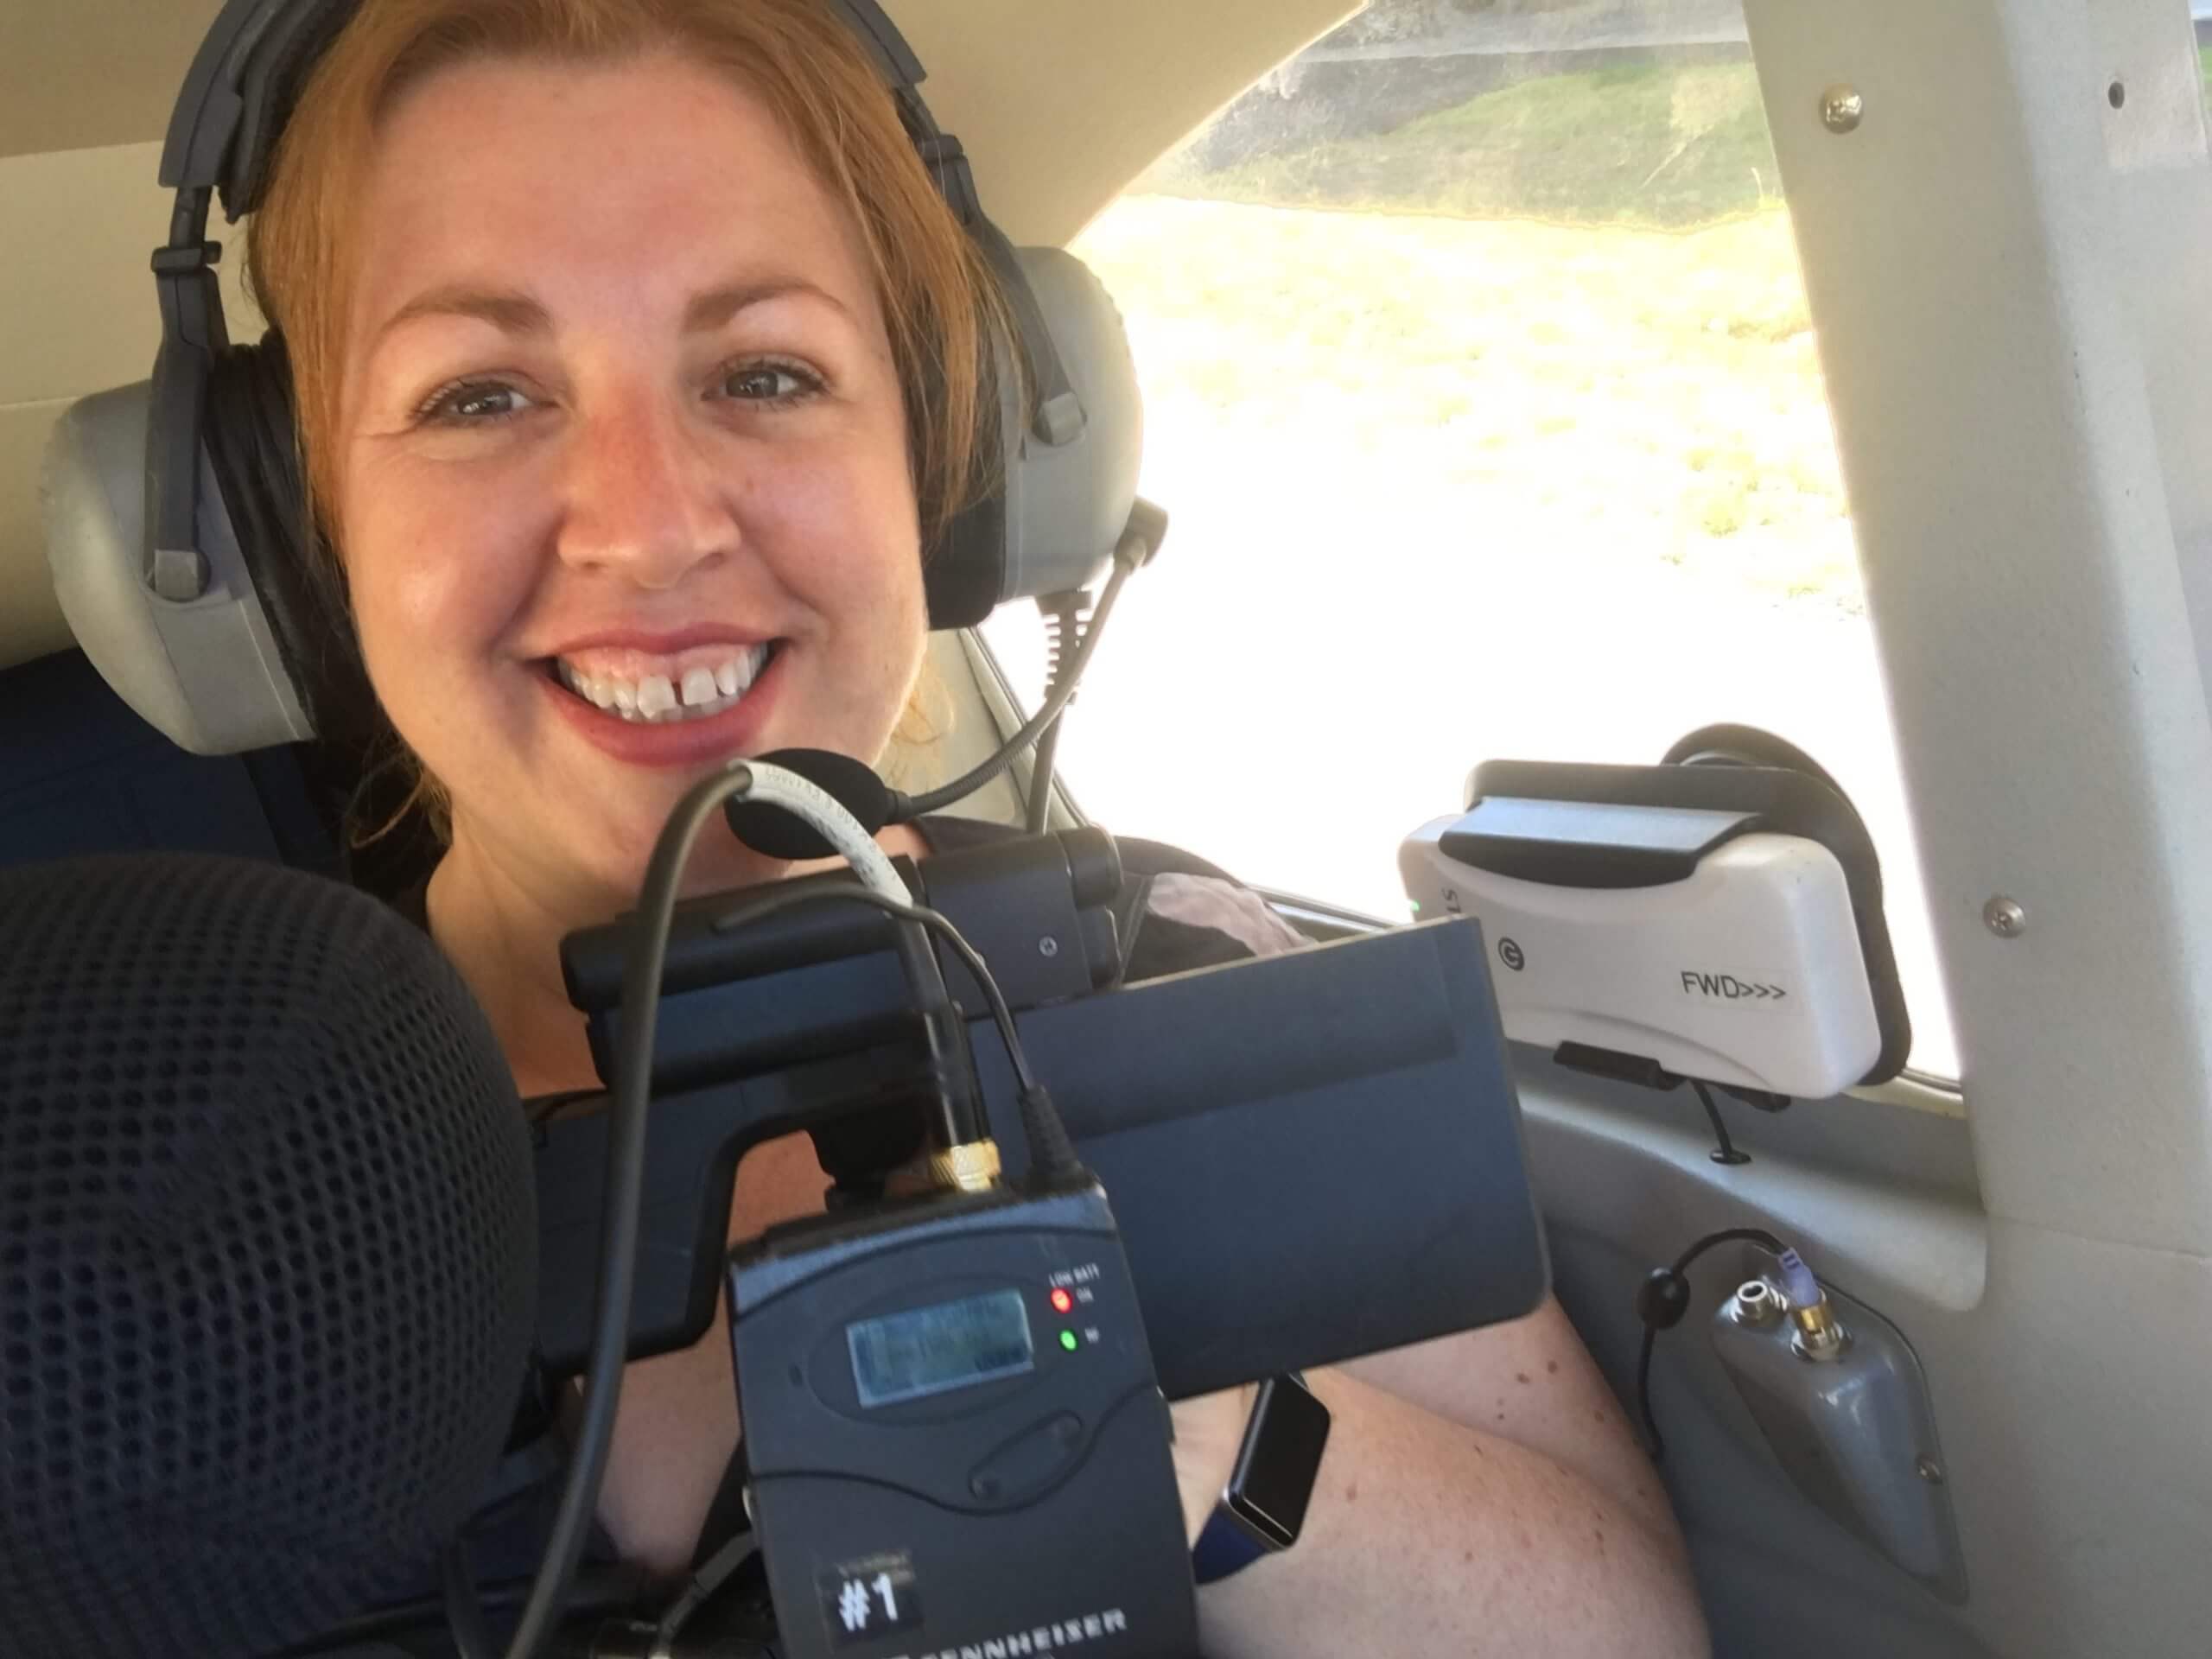 Production still of Jeanie Finlay looking directly at the camera and smiling. She is sitting in the back of a small Cessna plane, wearing headphones and holding a camera.